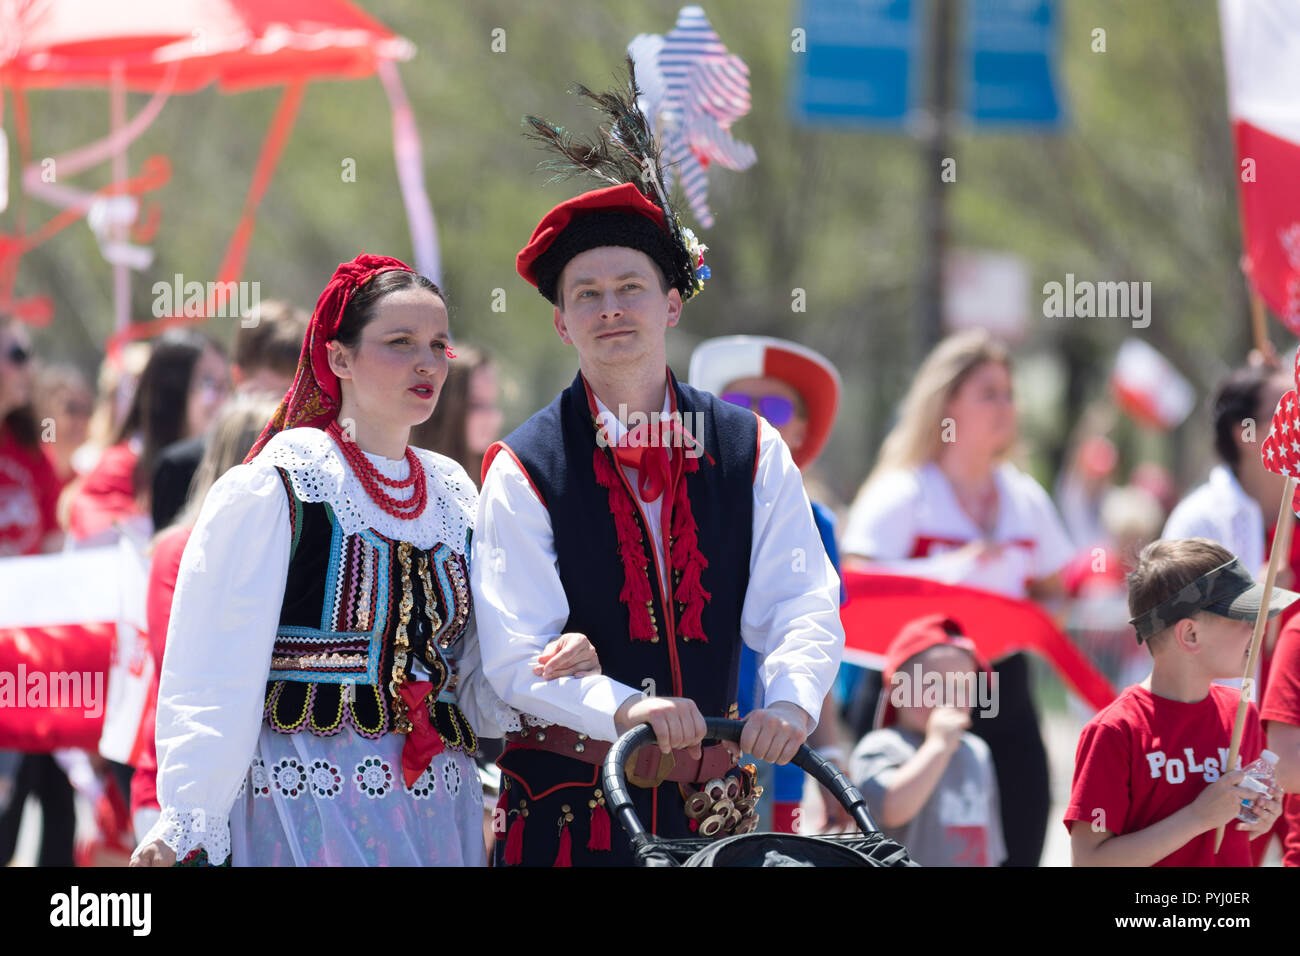 Chicago, Illinois, USA - May 5, 2018: The Polish Constitution Day ...